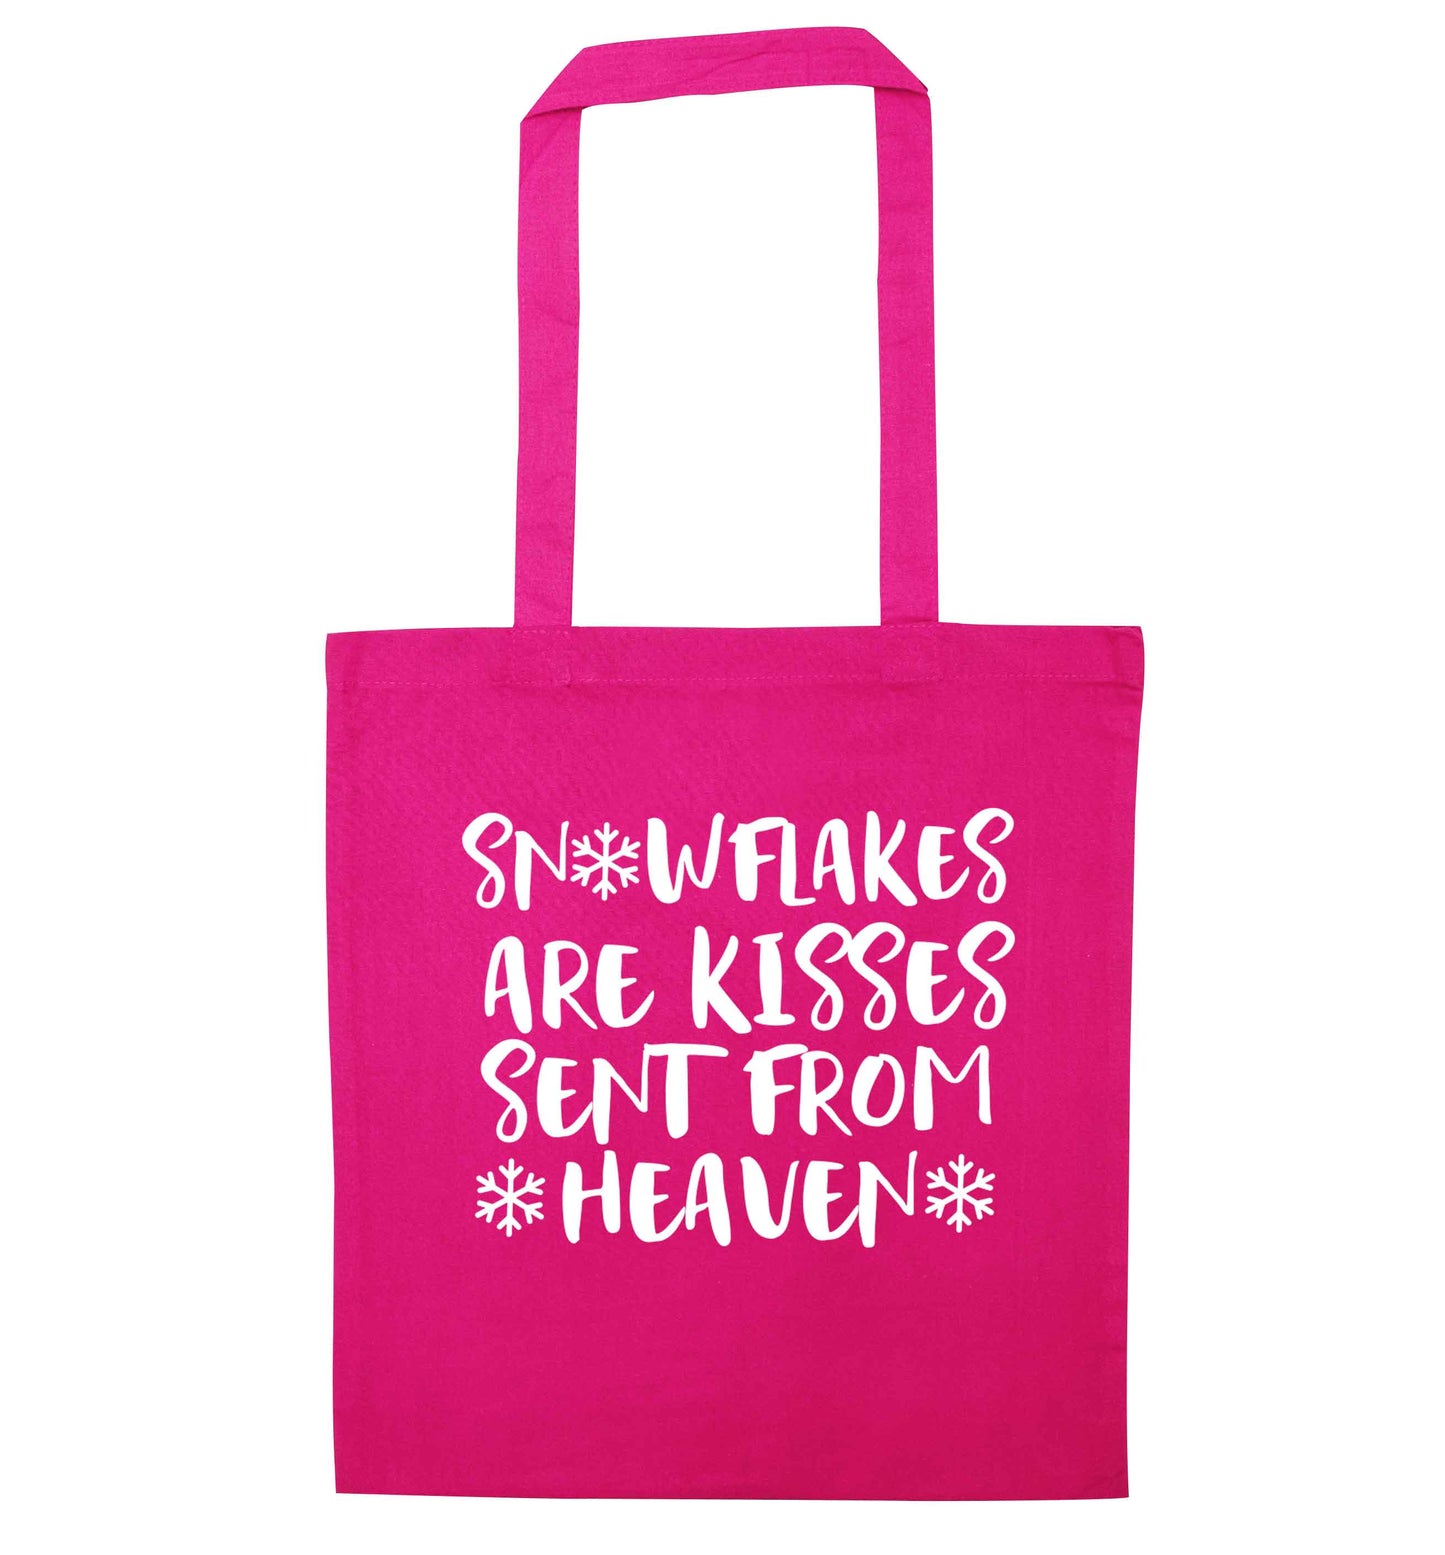 Snowflakes are kisses sent from heaven pink tote bag